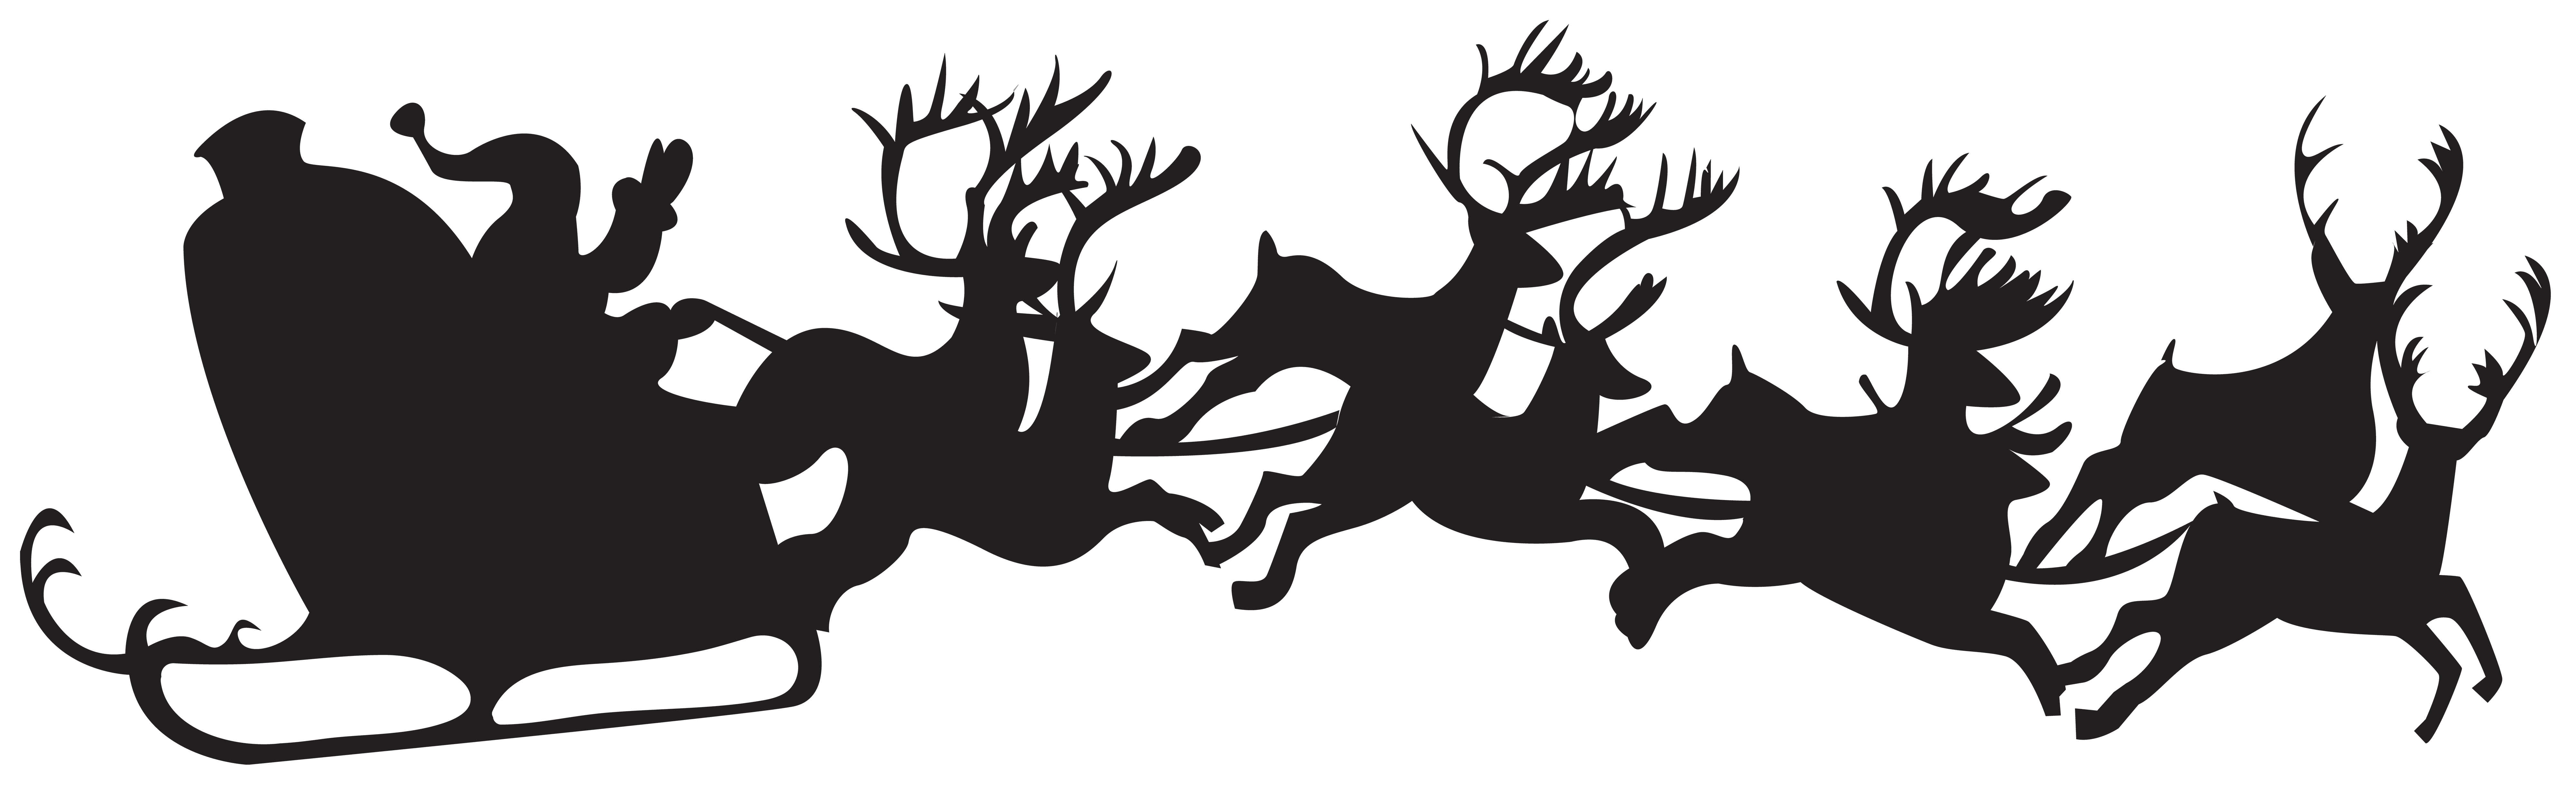 Download silhouette claus.